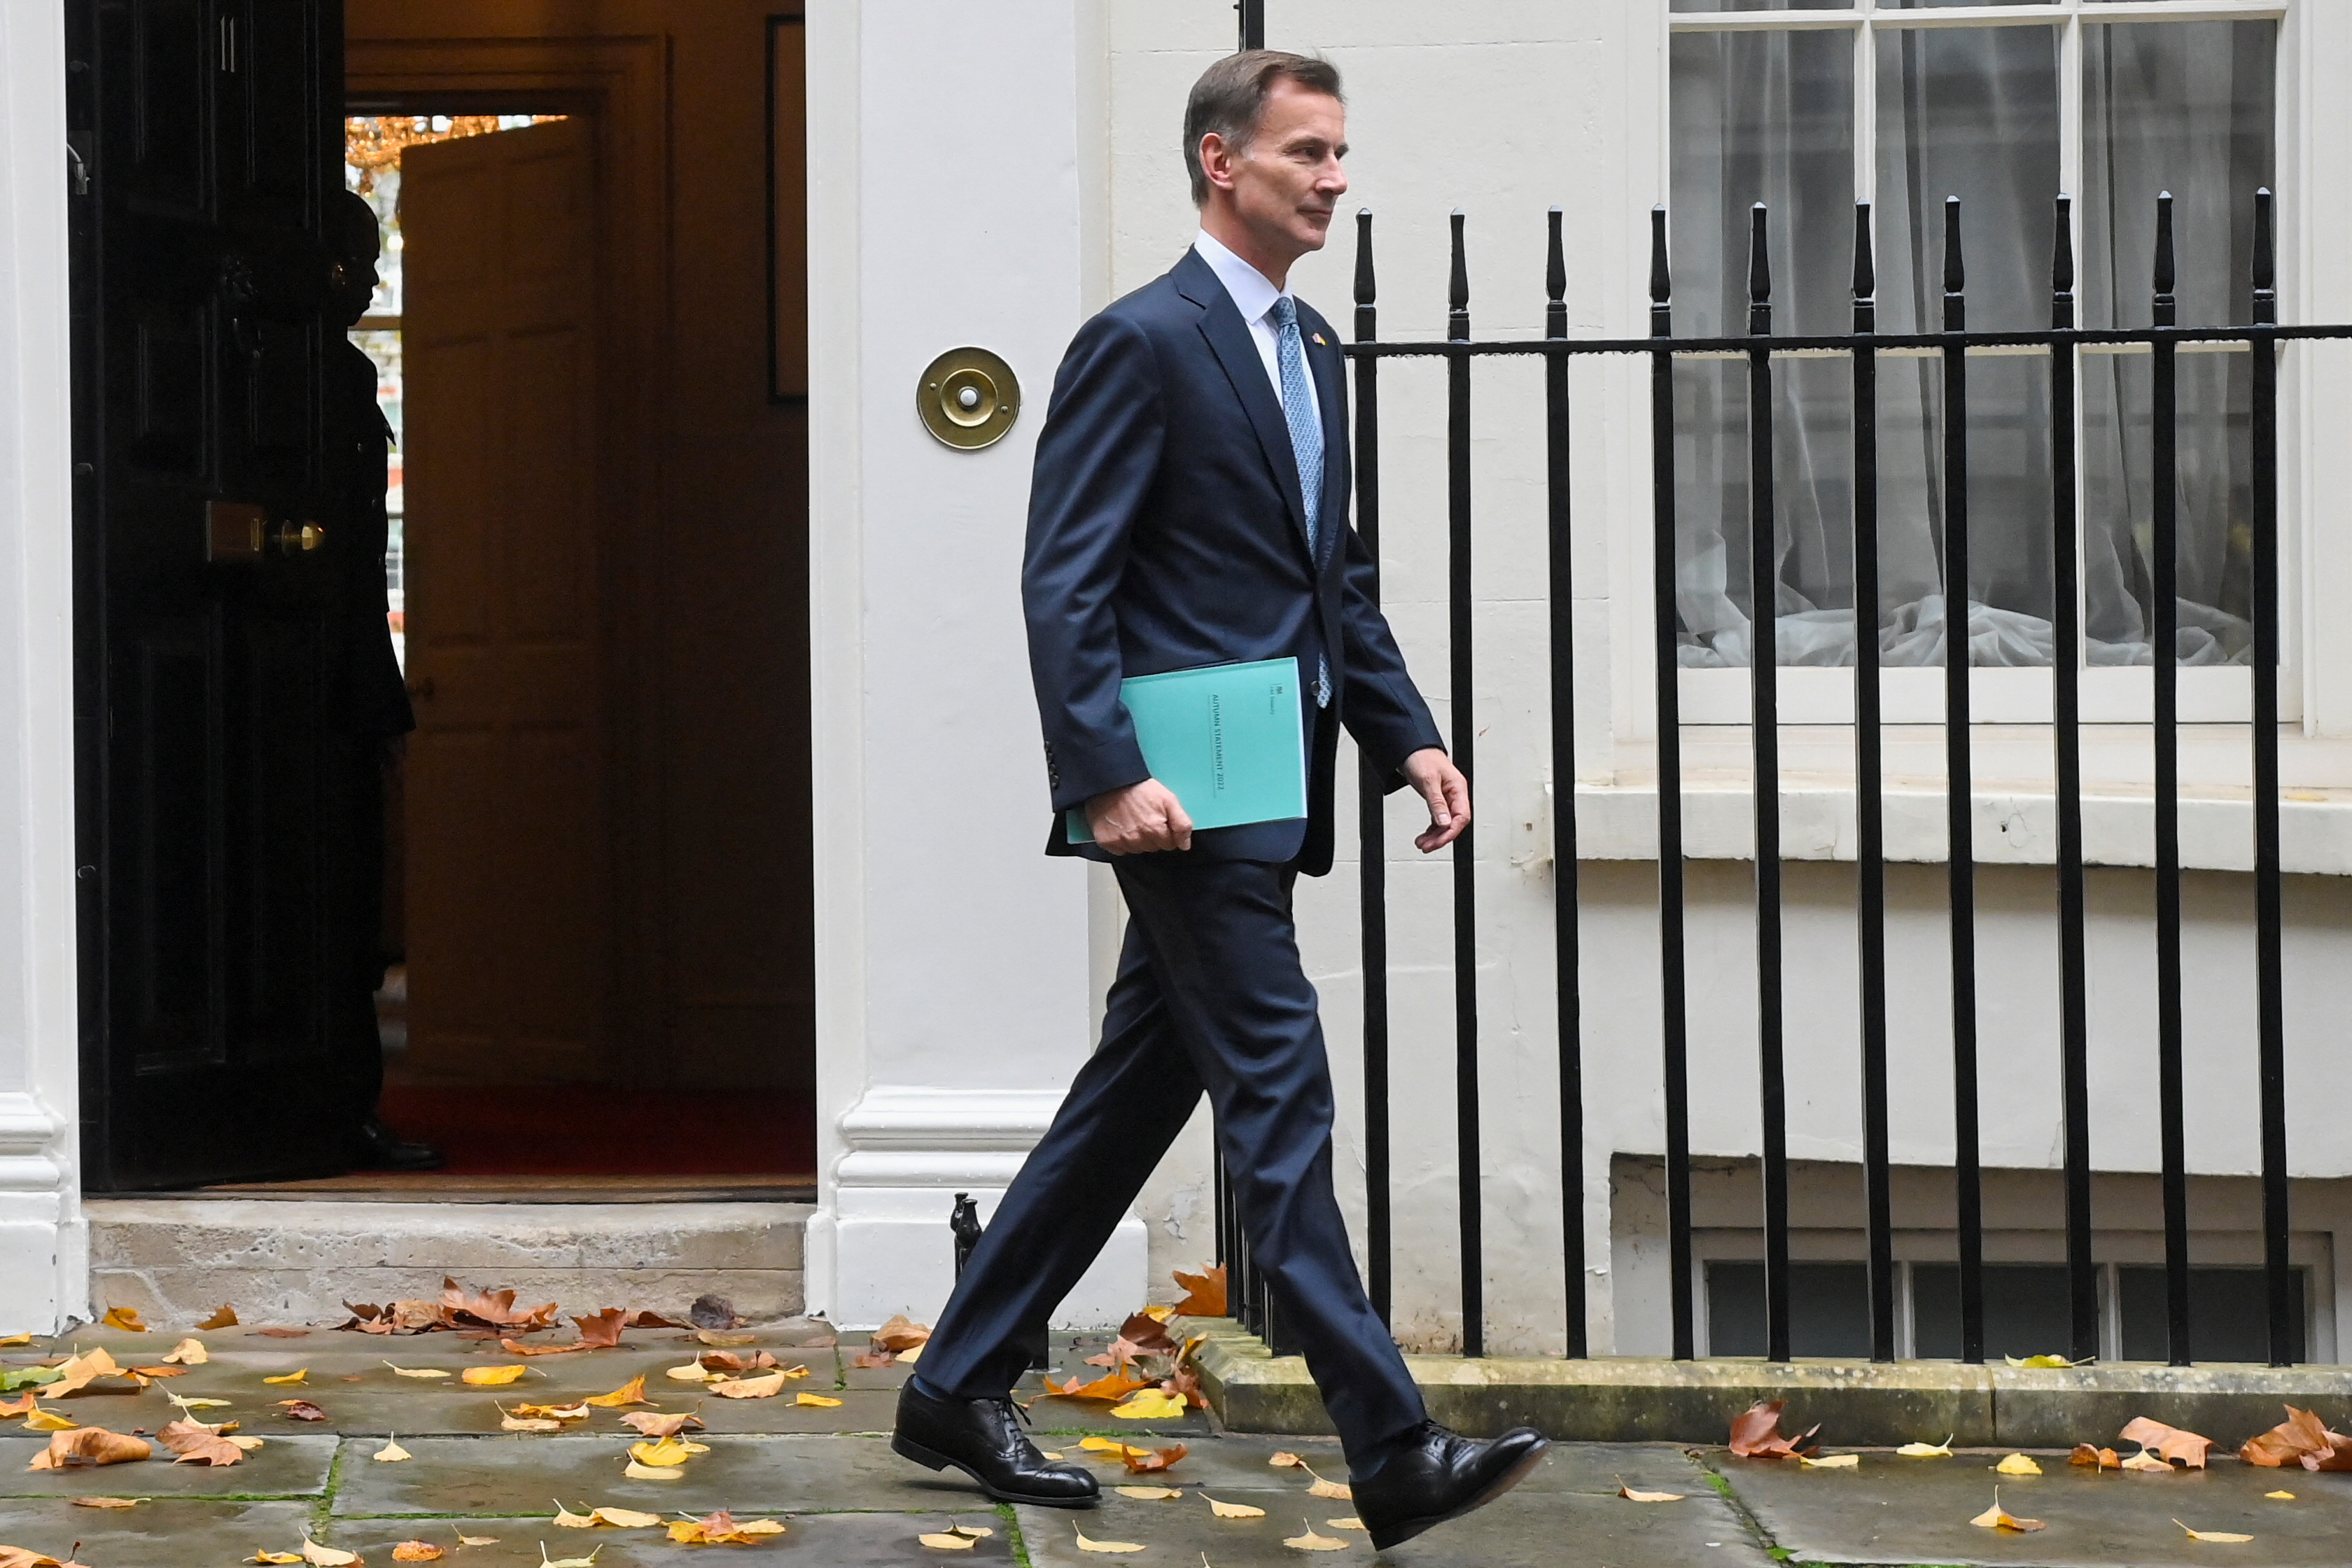 Britain's Chancellor of the Exchequer Jeremy Hunt walks down Downing Street in London